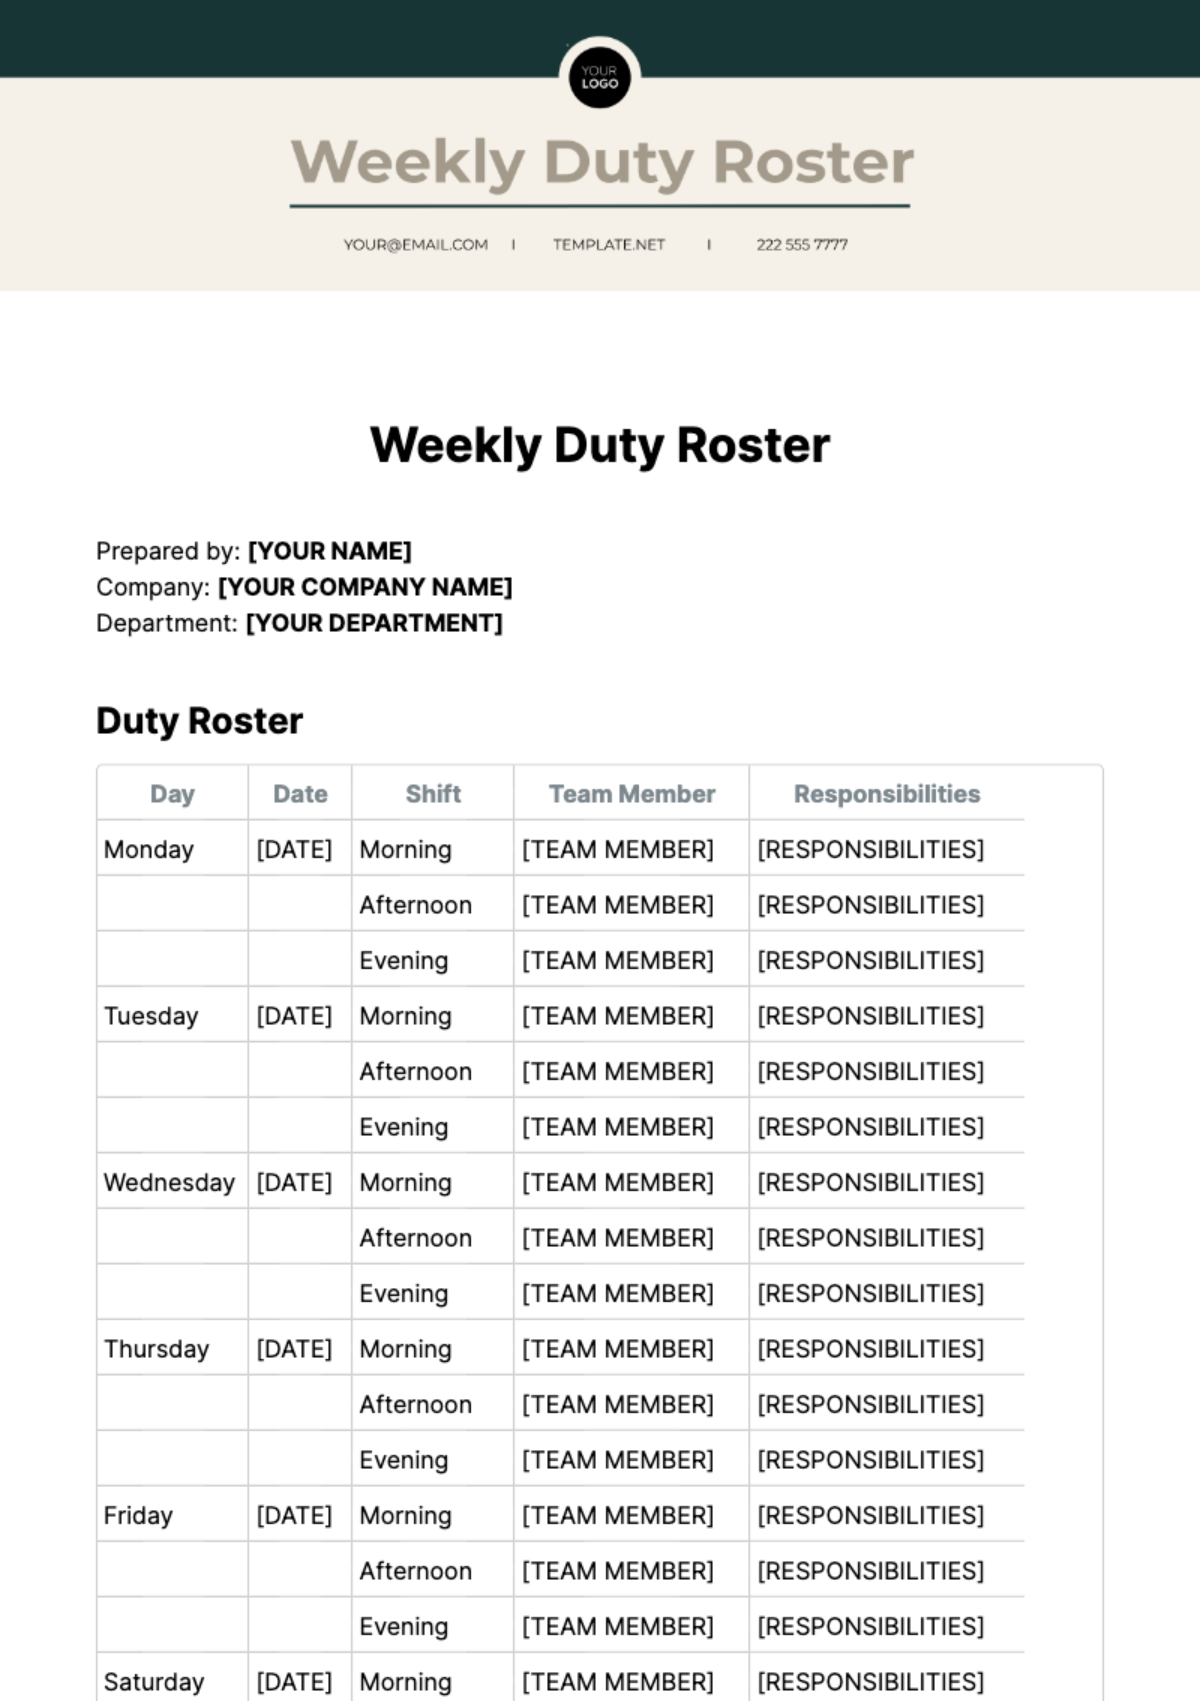 Free Weekly Duty Roster Template